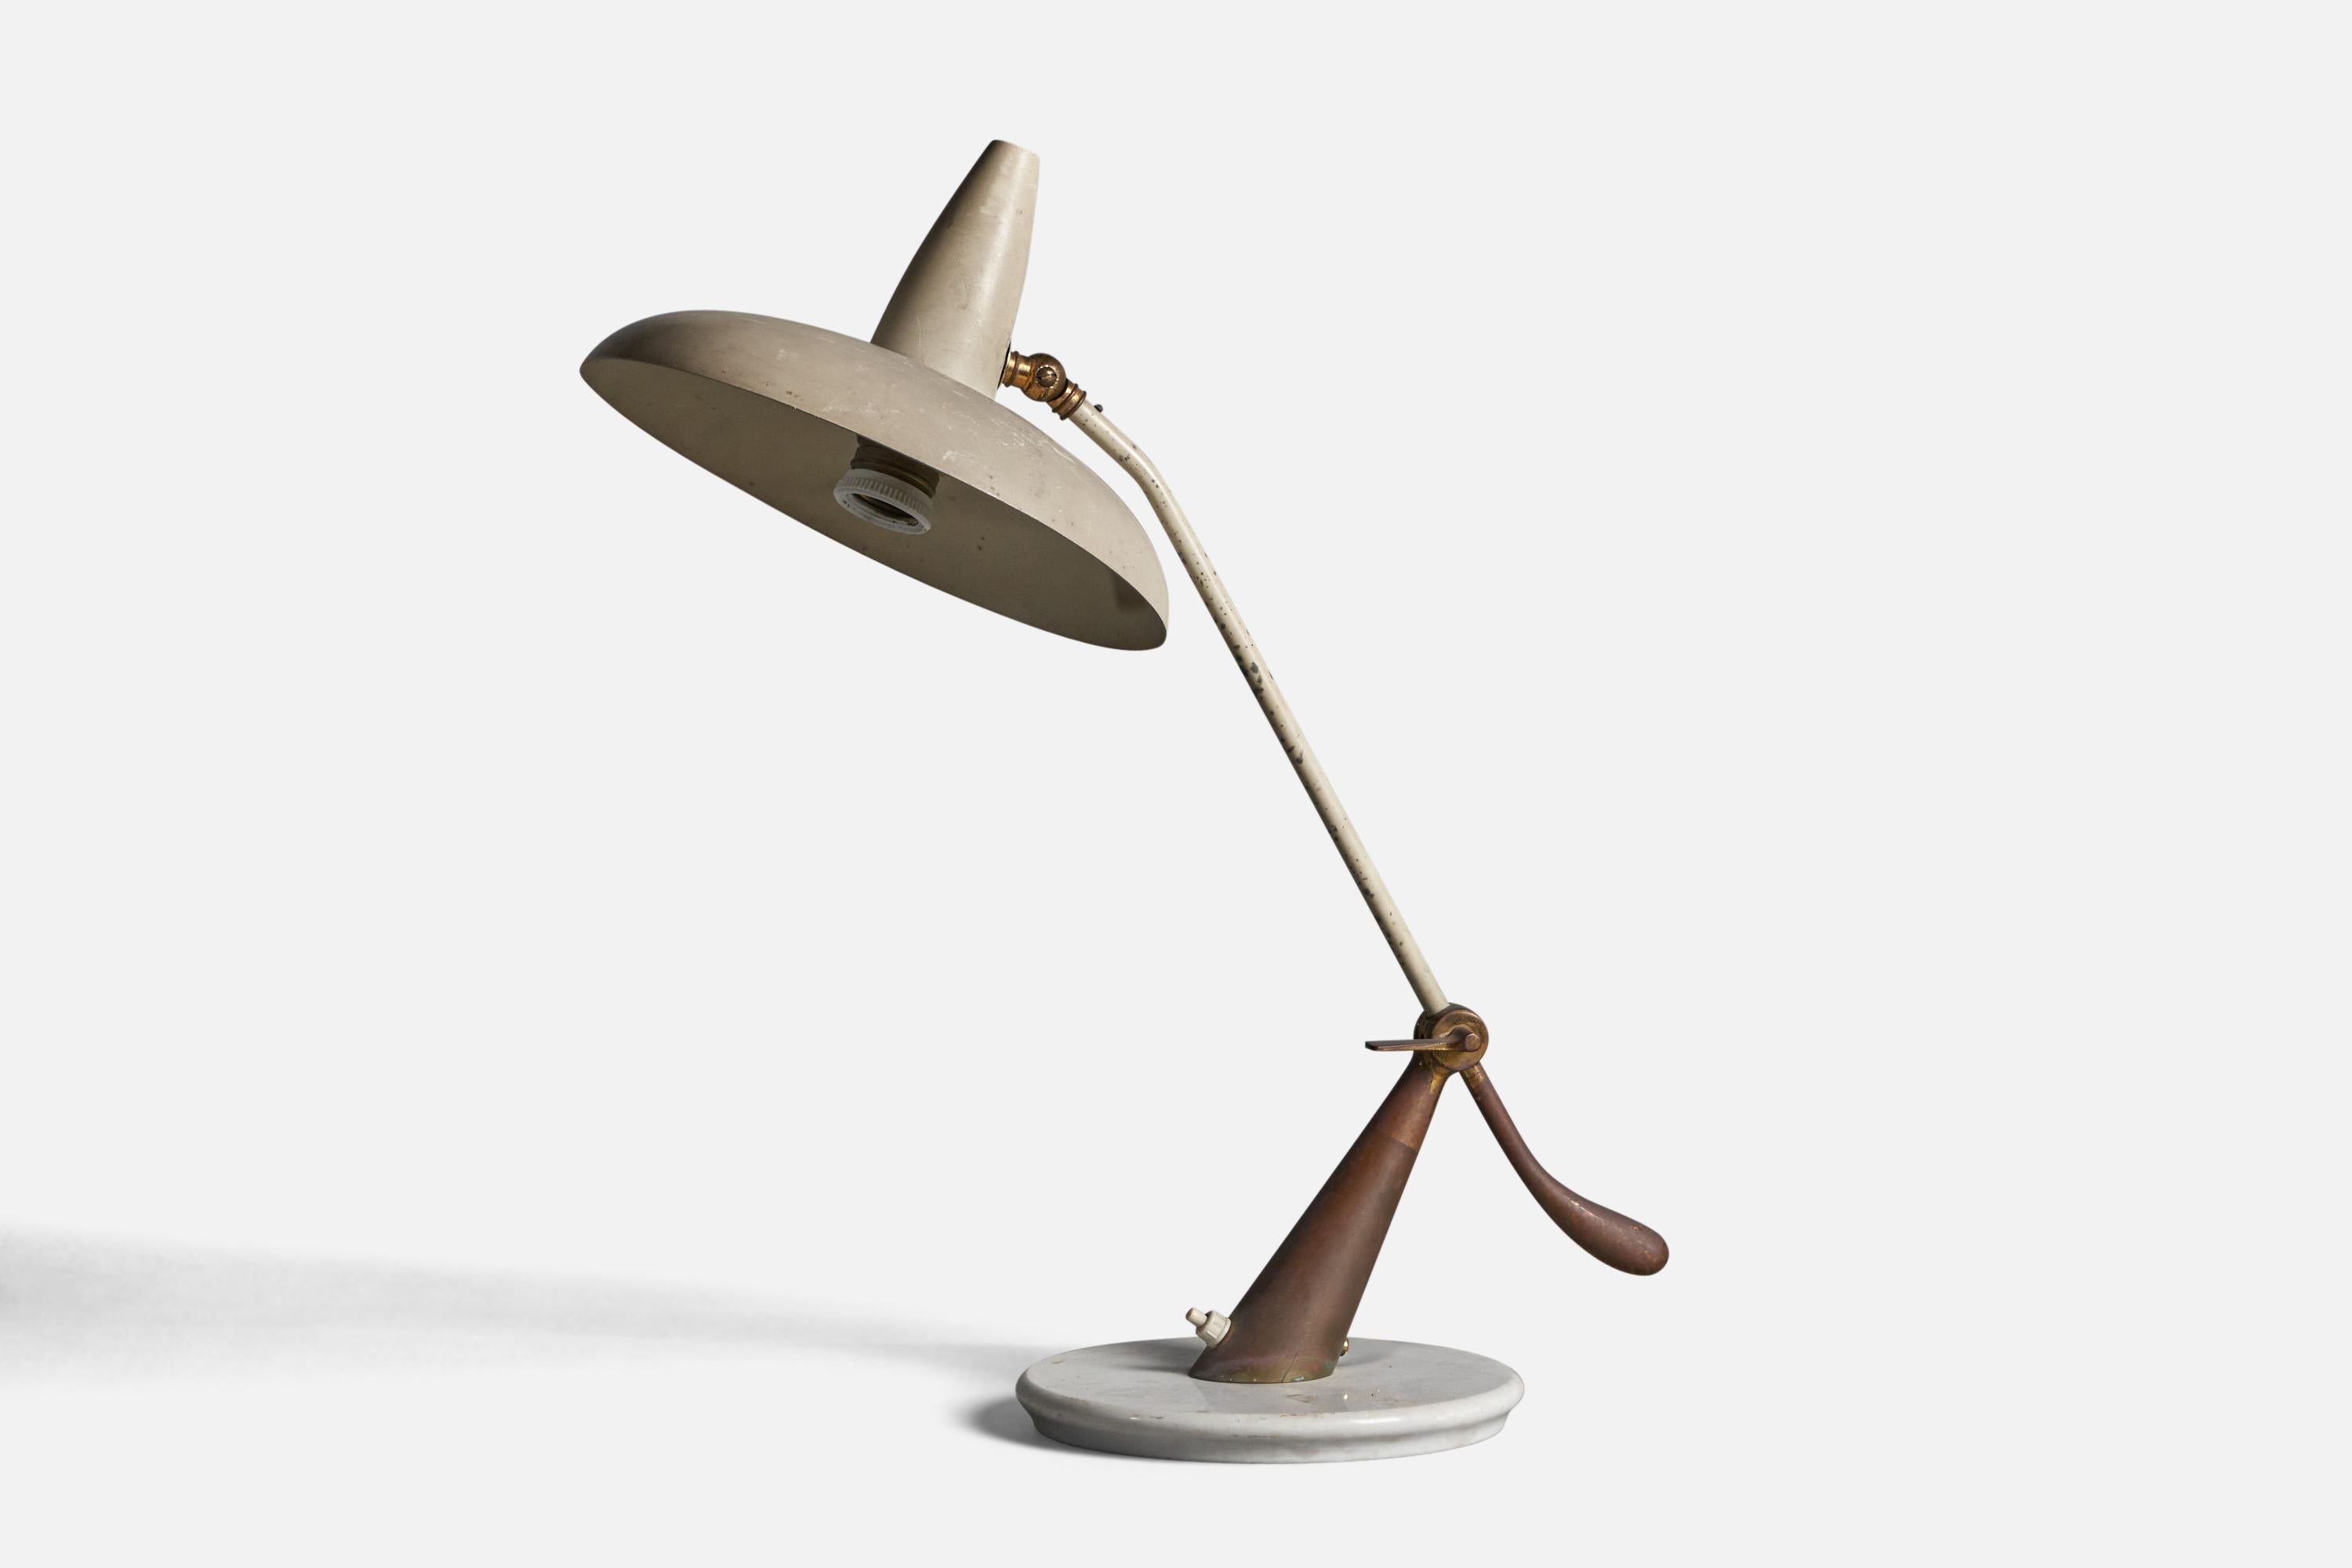 An adjustable brass, metal and marble table lamp, designed and produced in Italy, c. 1940s.

Overall Dimensions (inches): 20